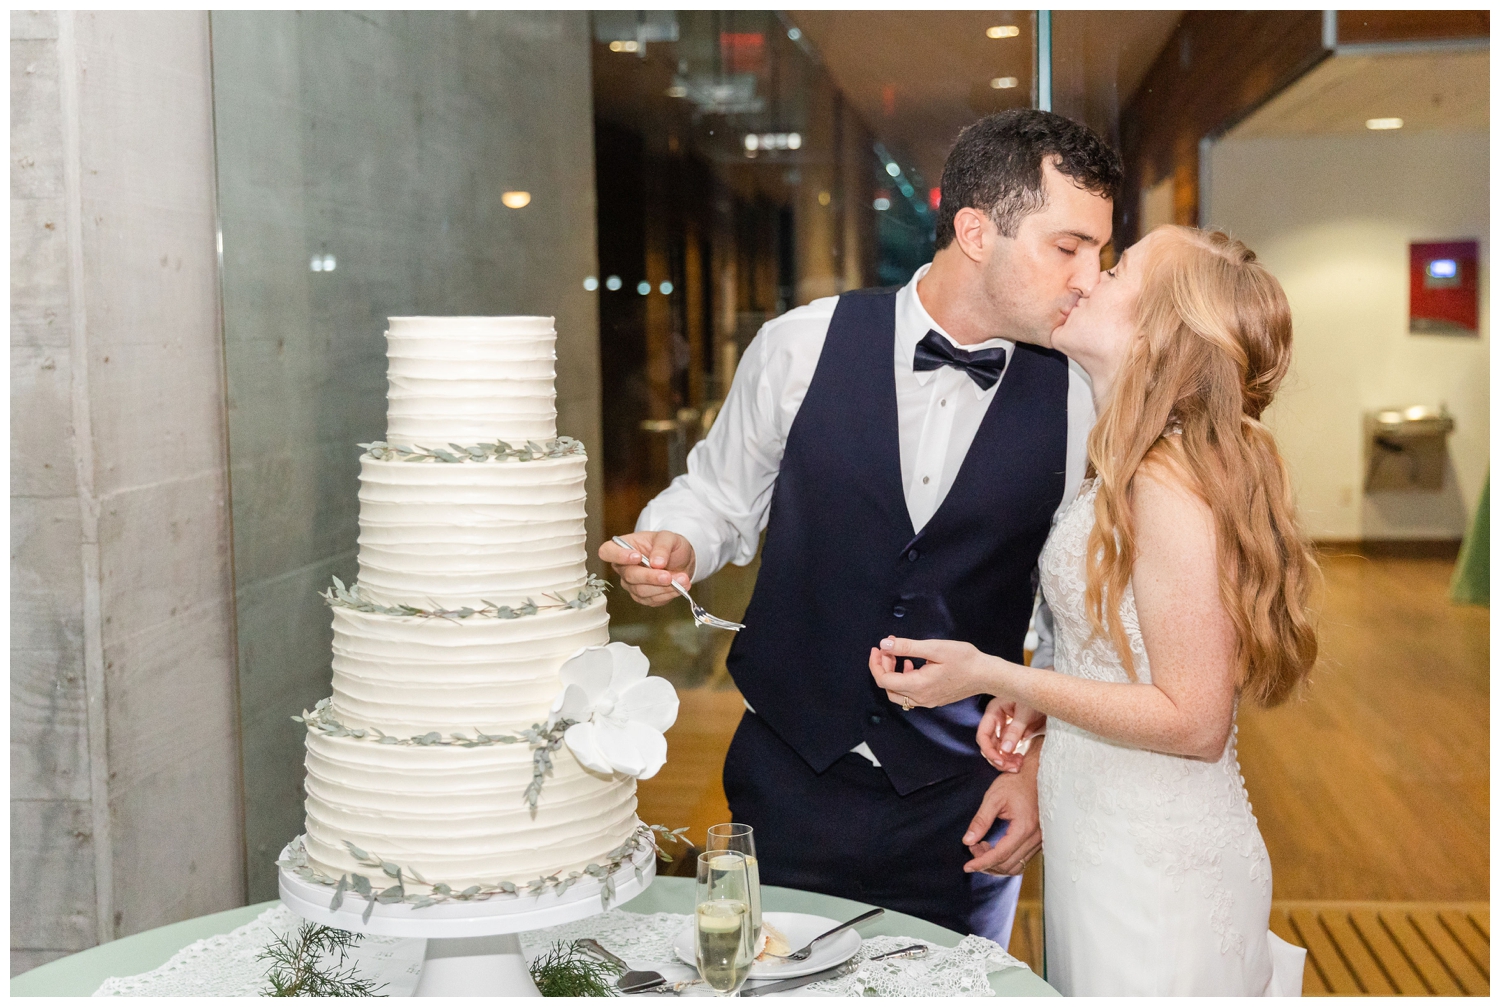 bride and groom kissing at cake cutting